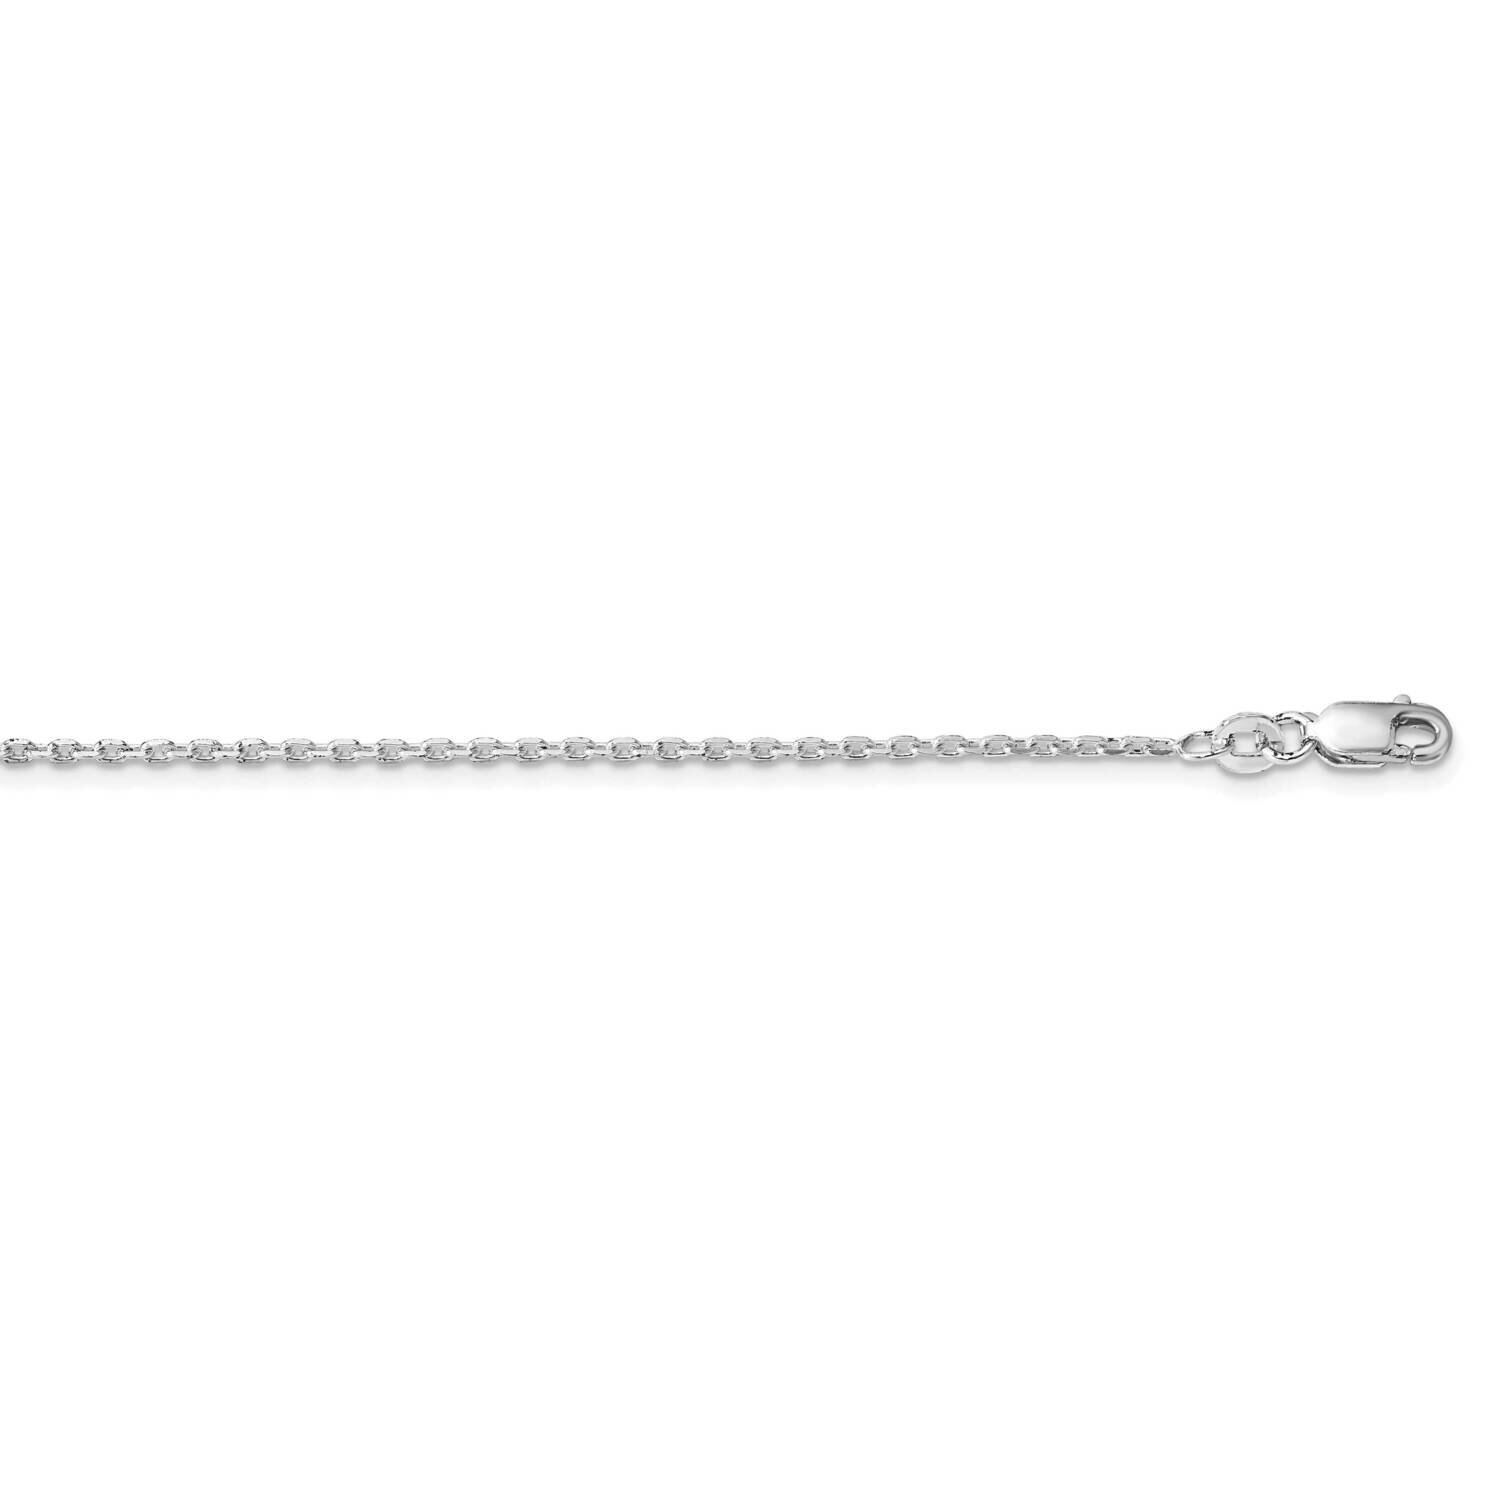 1.5mm Beveled Oval Cable Chain 26 Inch Sterling Silver Rhodium-Plated QCA050R-26